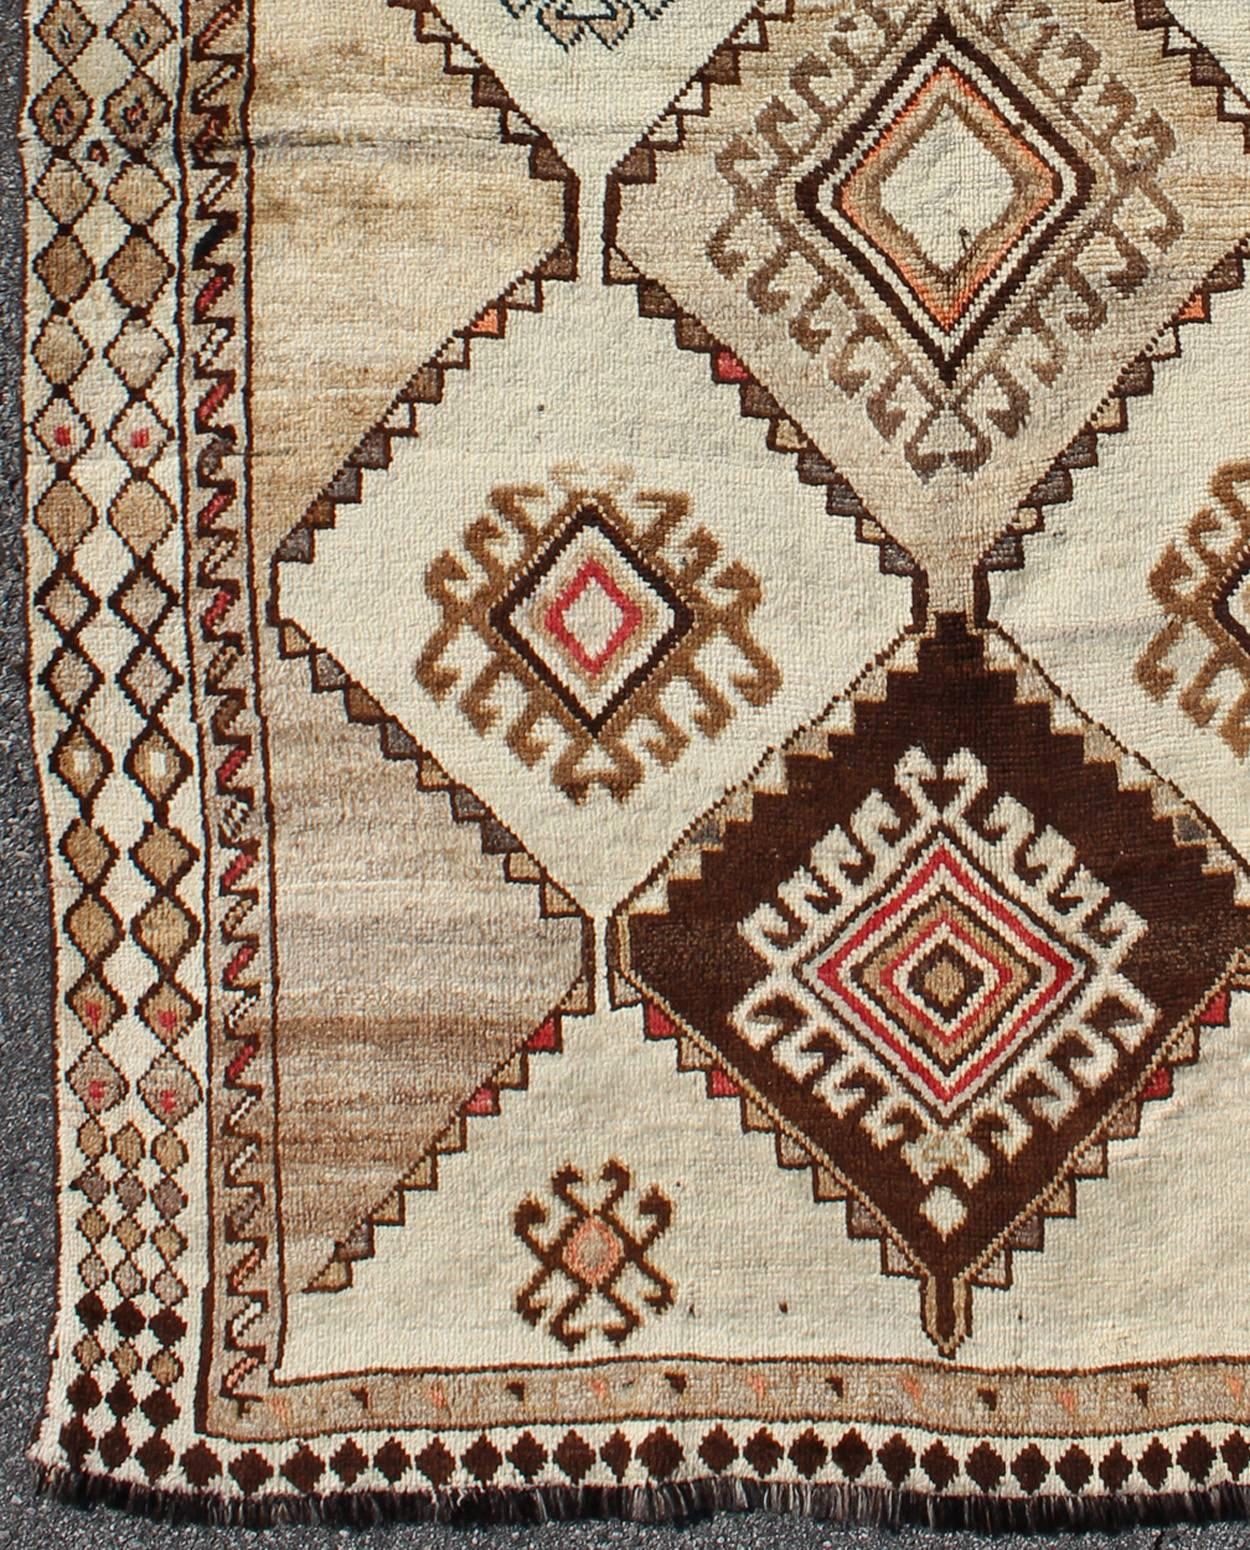 Vintage Persian Gabbeh with Diamond and Geometric design in Earth tones. rug J10-1021, country of origin / type: Iran / Gabbeh, circa 1940

This high-pile excellent condition Persian Gabbeh from Southern Iran consists of large scale repeating,